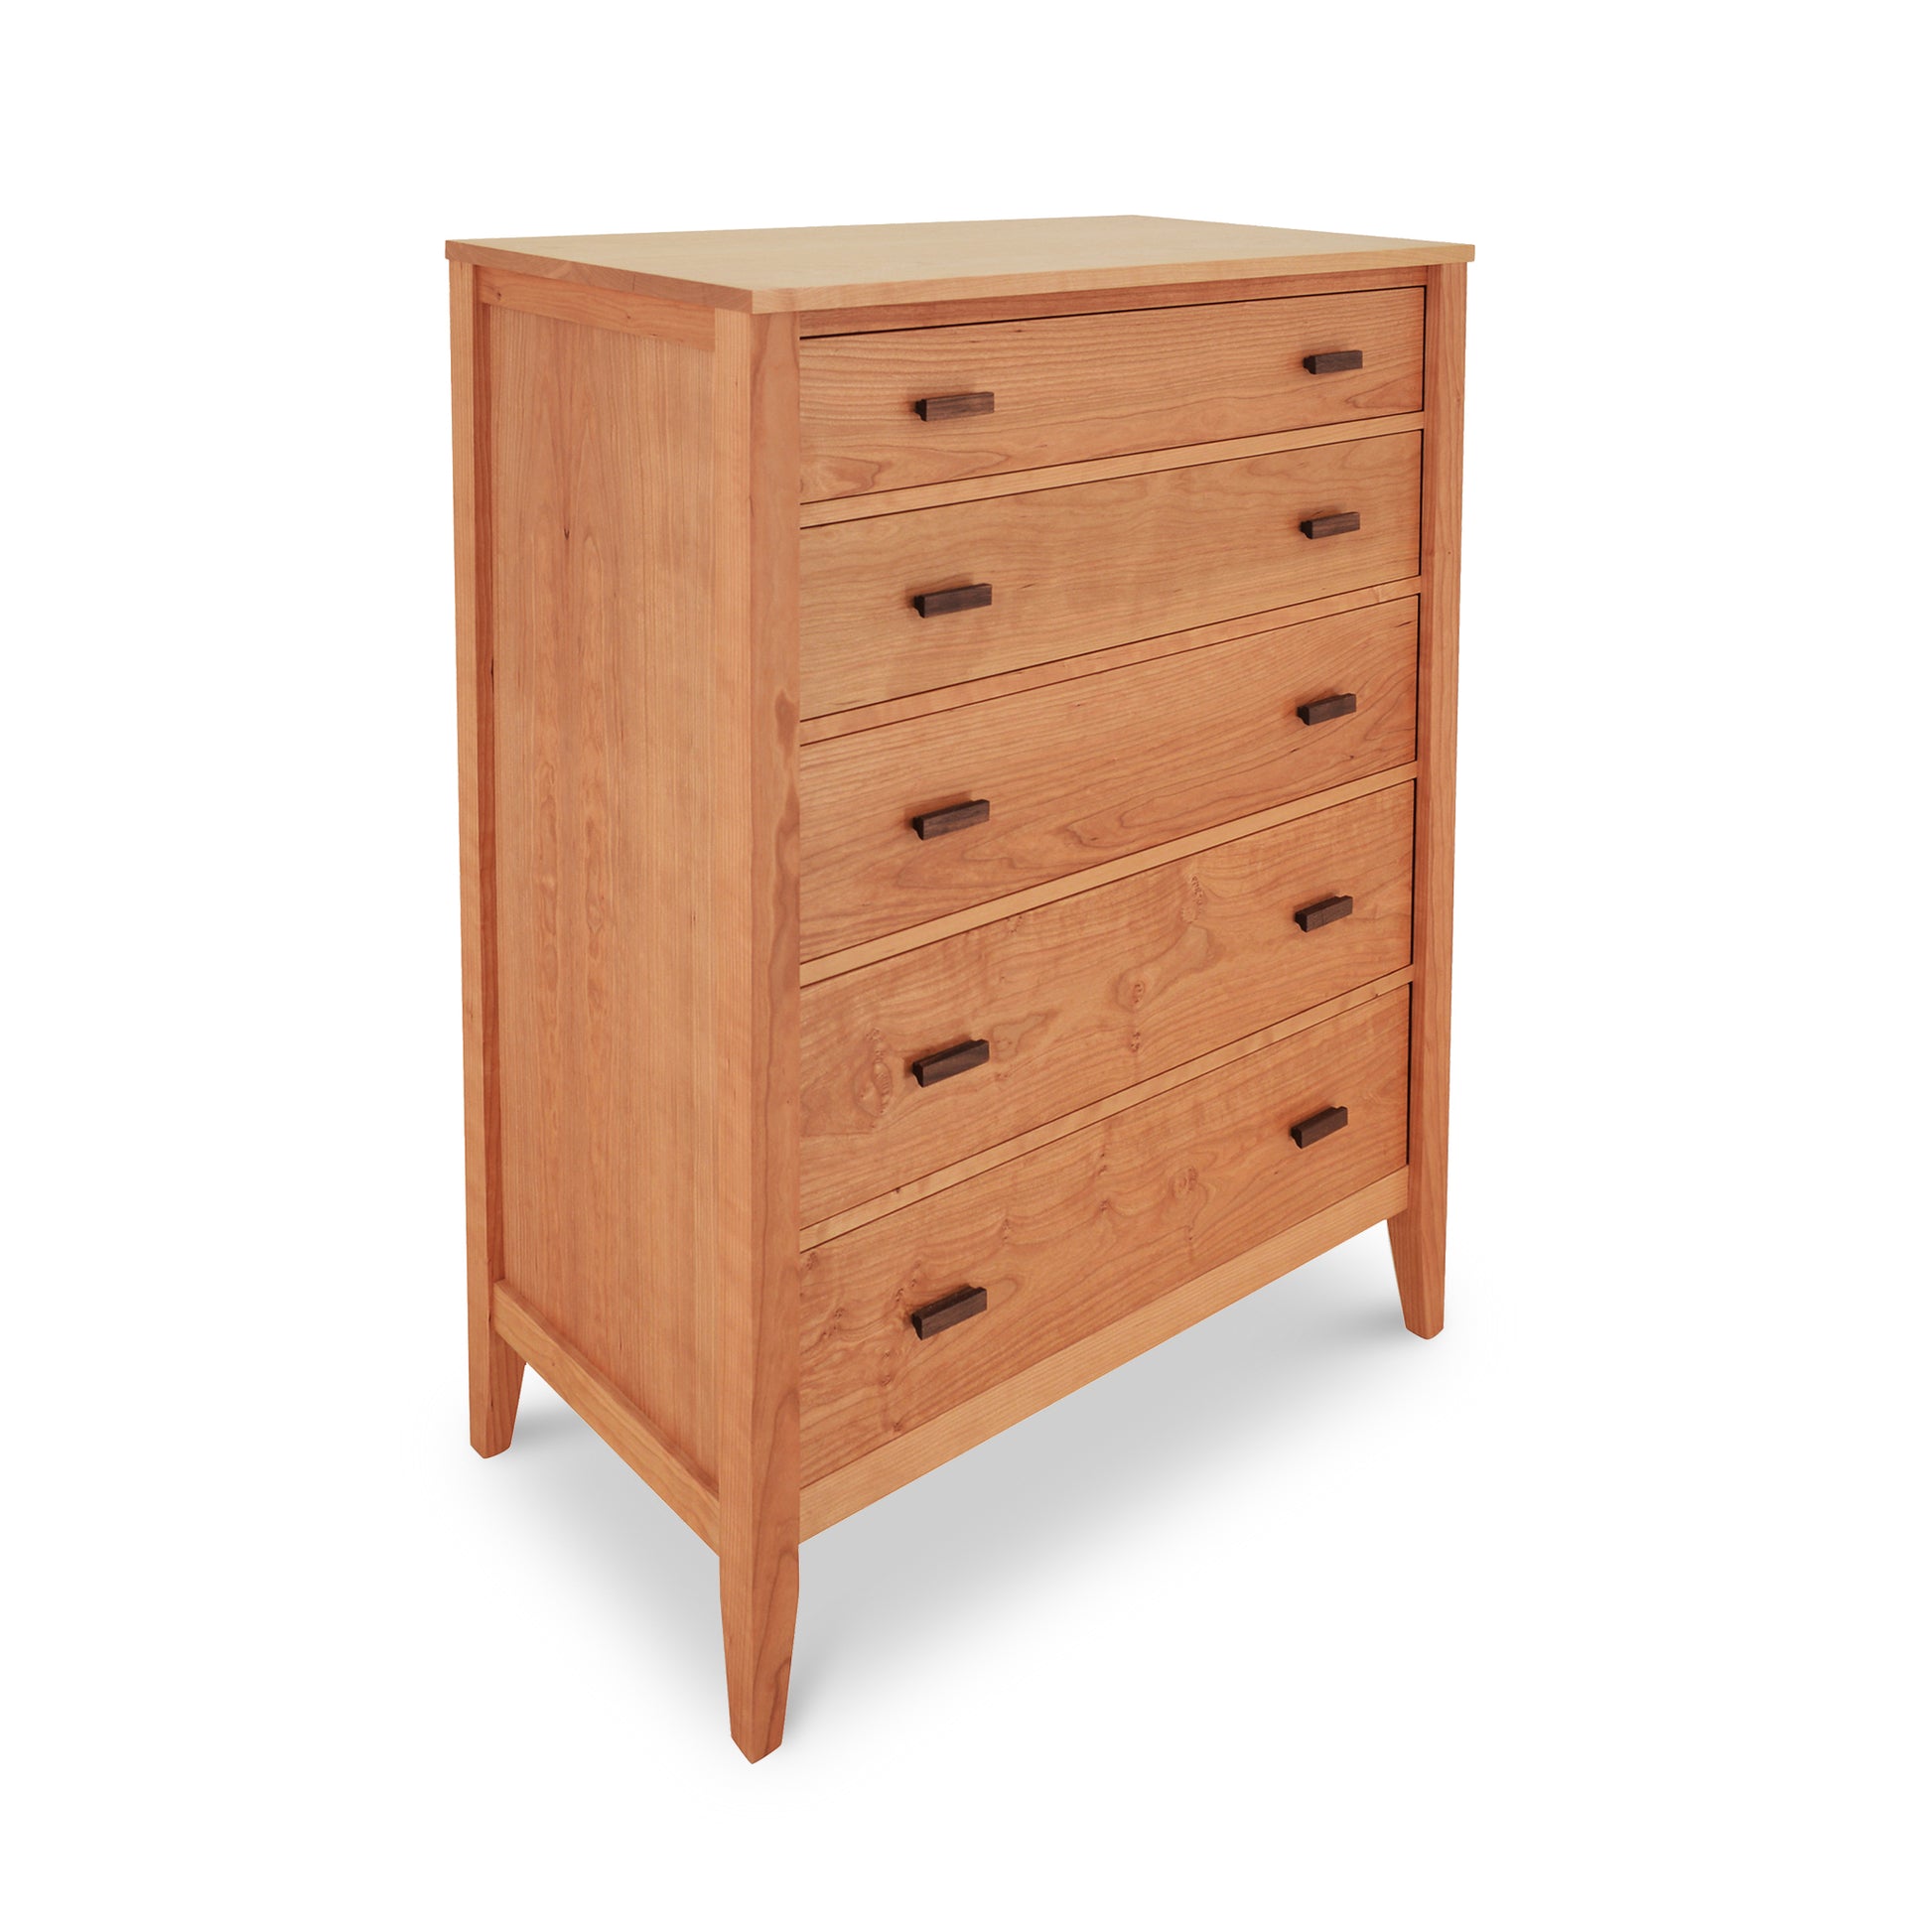 A Andover Modern 5-Drawer Chest by Maple Corner Woodworks standing on angled legs, isolated on a white background. Each drawer features a simple horizontal pull handle.